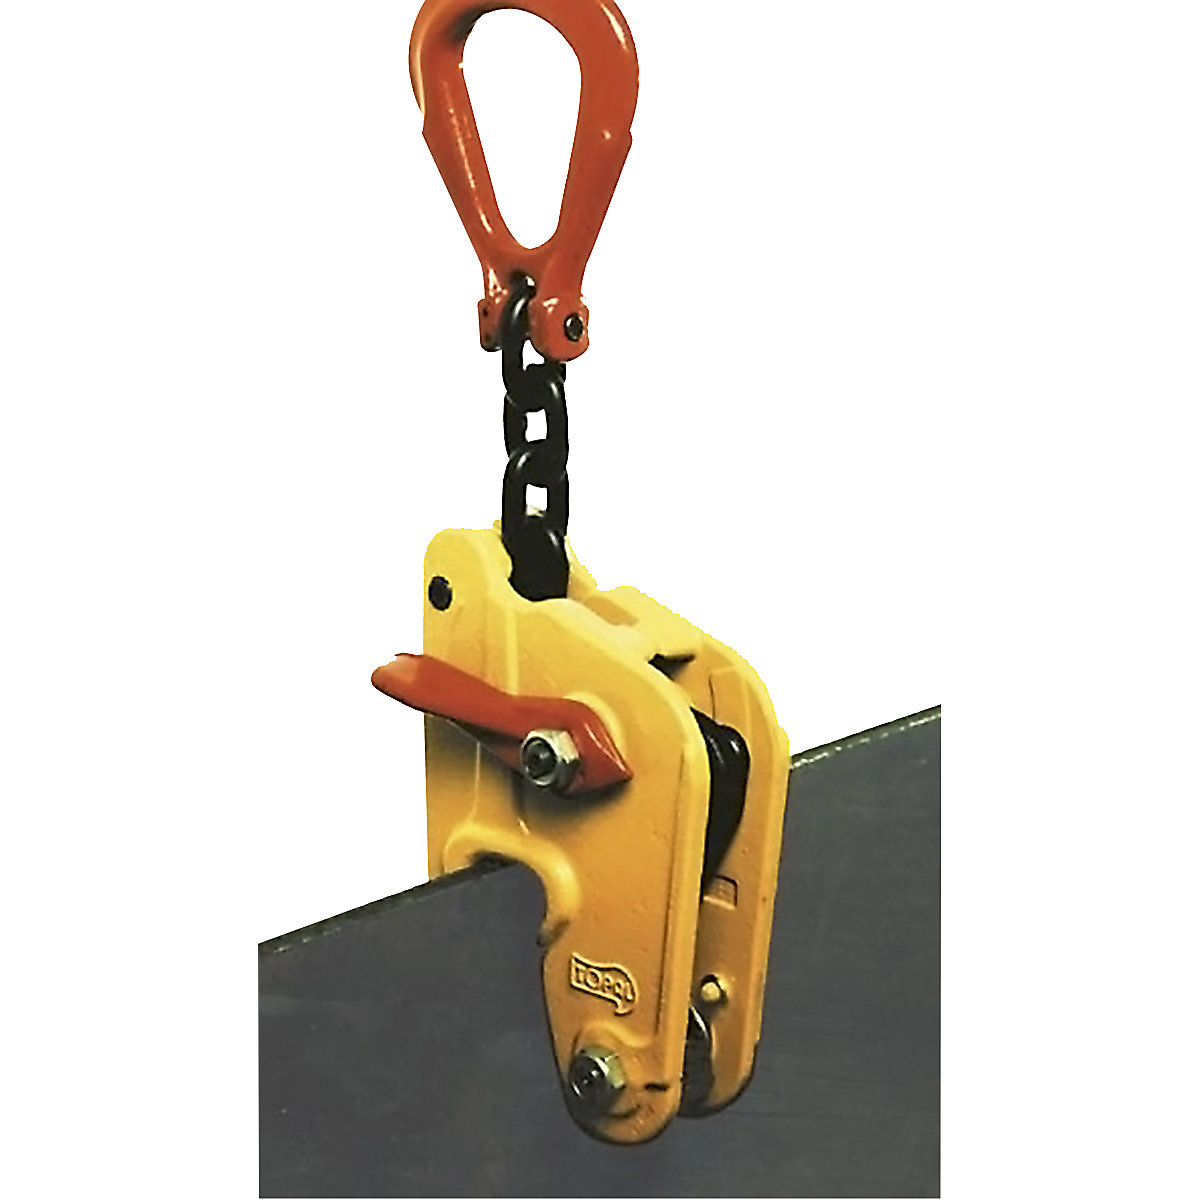 NK 3 plate clamp